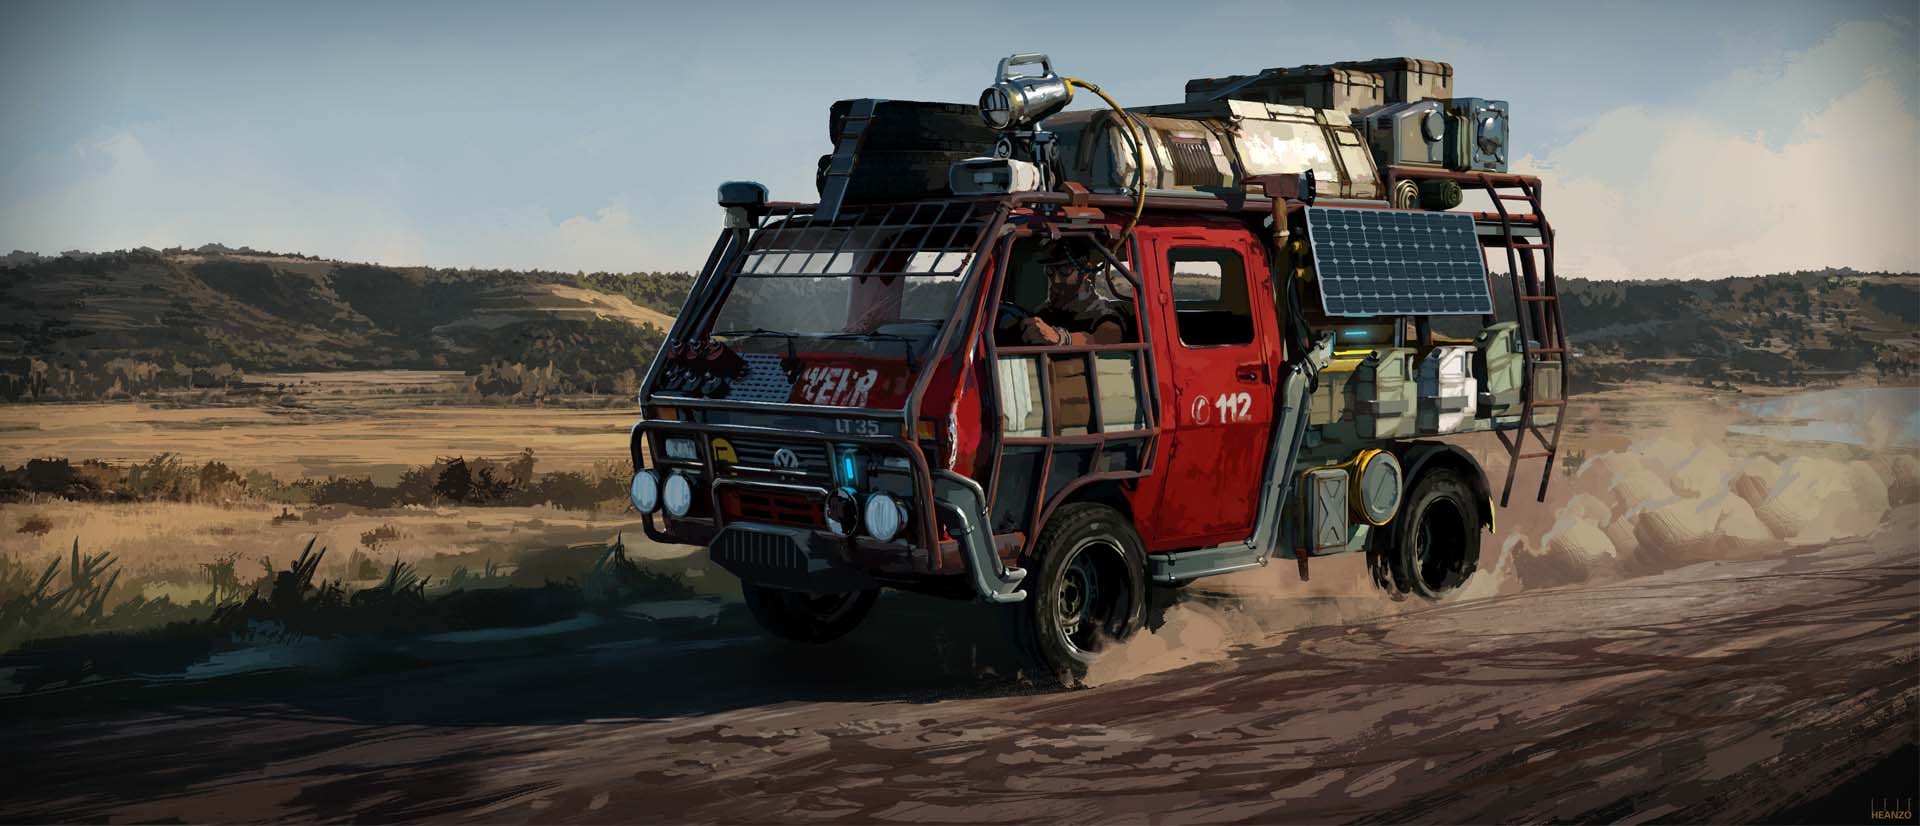 Moses Truck - Vehicle Concept Art